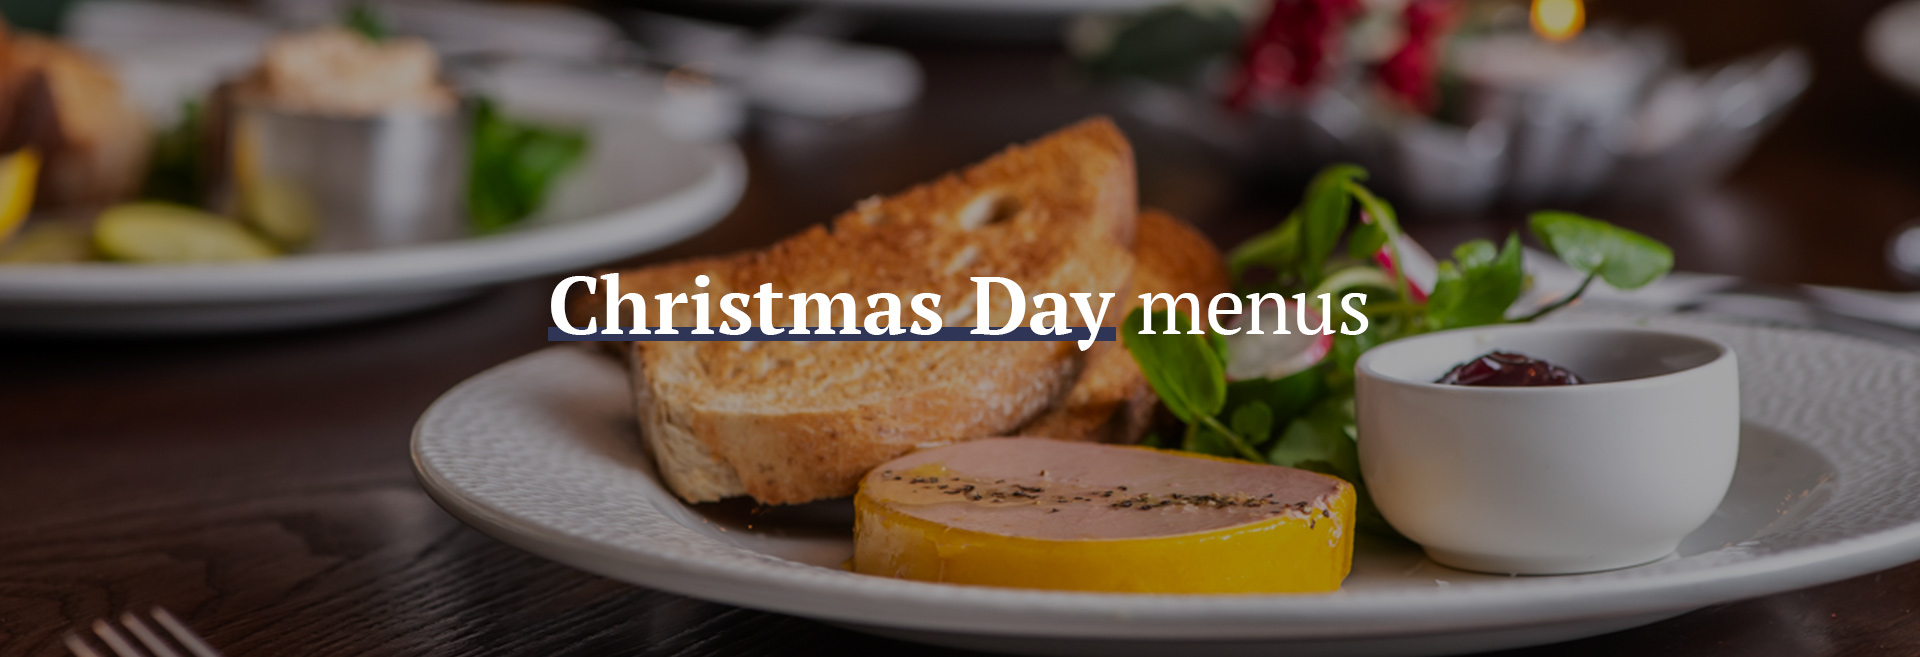 Christmas Day Menu at The Commercial